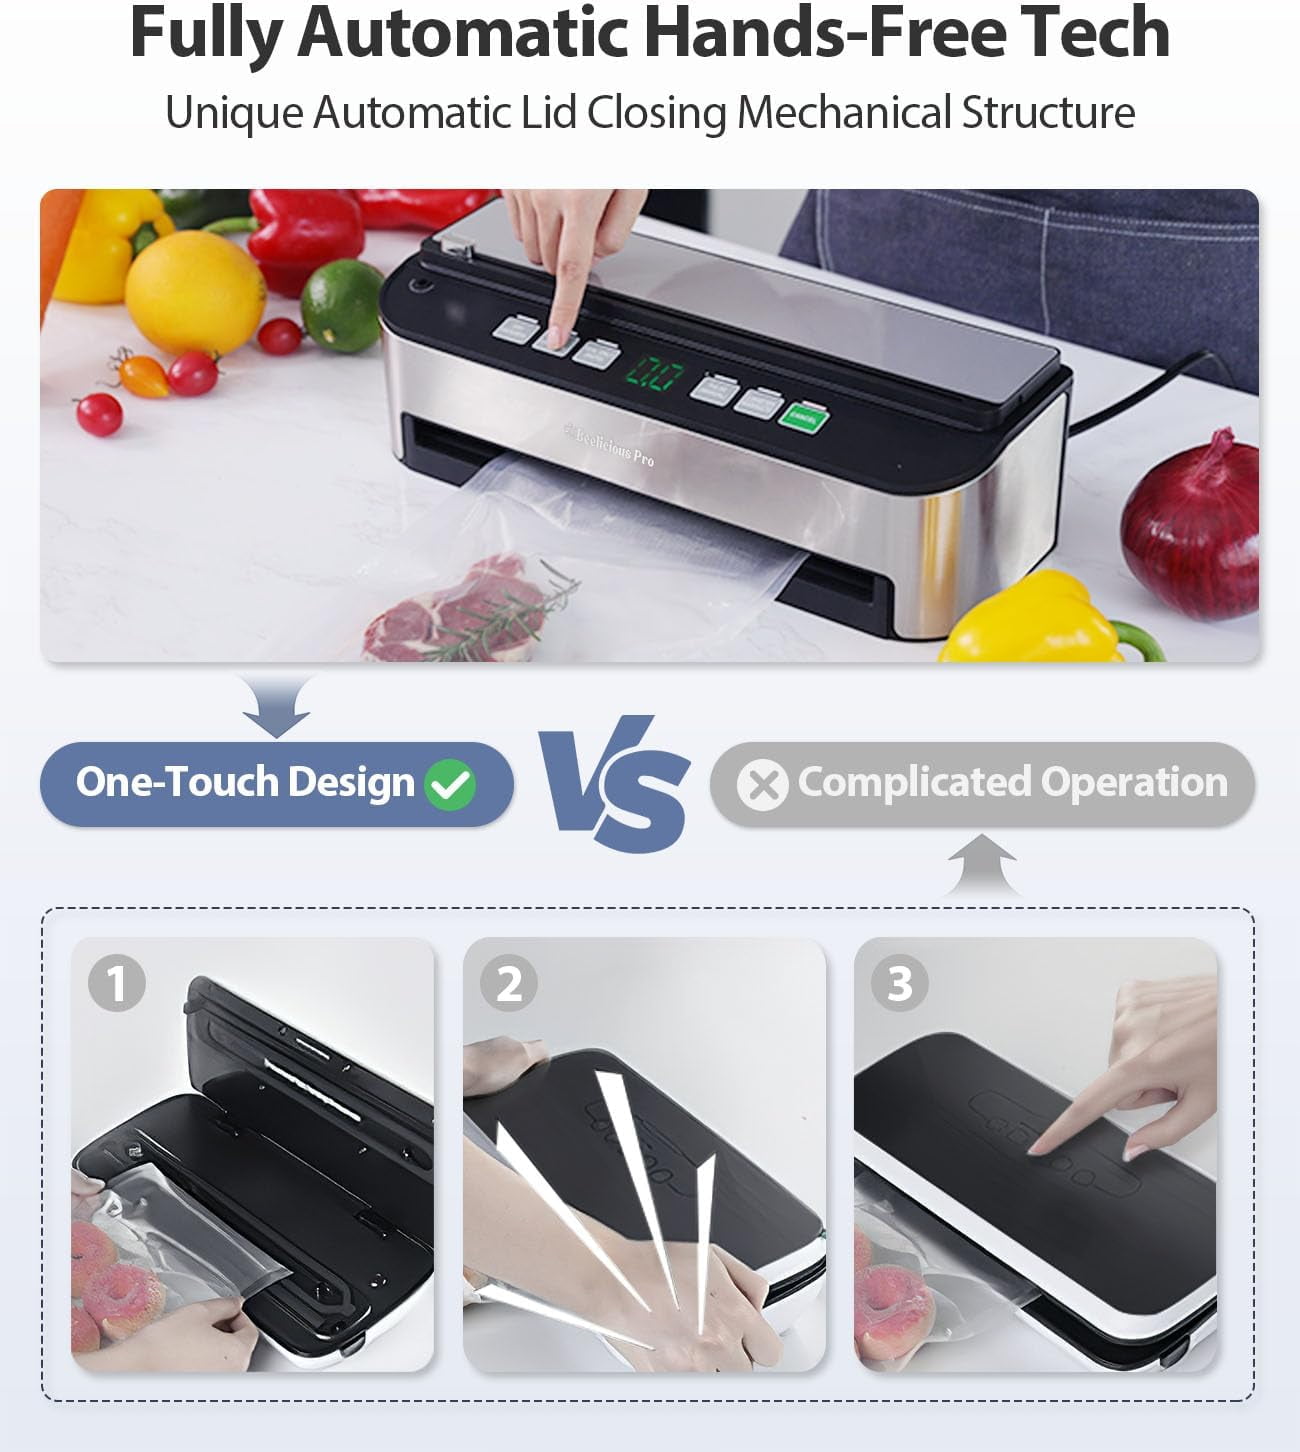 Vacuum Sealer Machine, Beelicious® 85KPA Fully Automatic 8-IN-1 Food Sealer  with Bags Storage, Build-in Cutter, Moist Mode and Air Suction Hose 